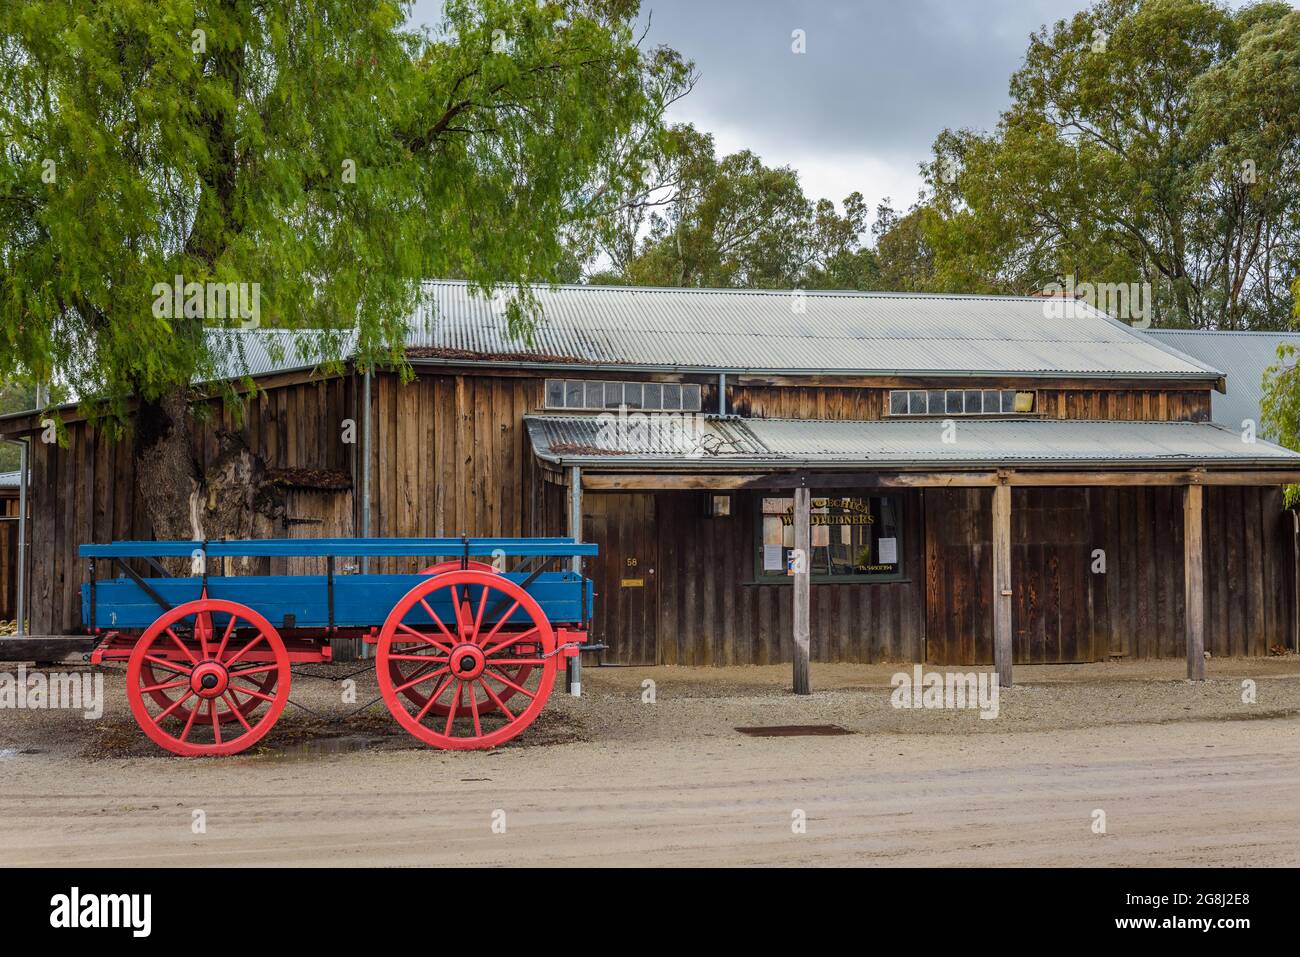 A single historic wagon stands on a dirt main street in  the old historic replica town of Echuca on the Murray River in Victoria, Australia. Stock Photo